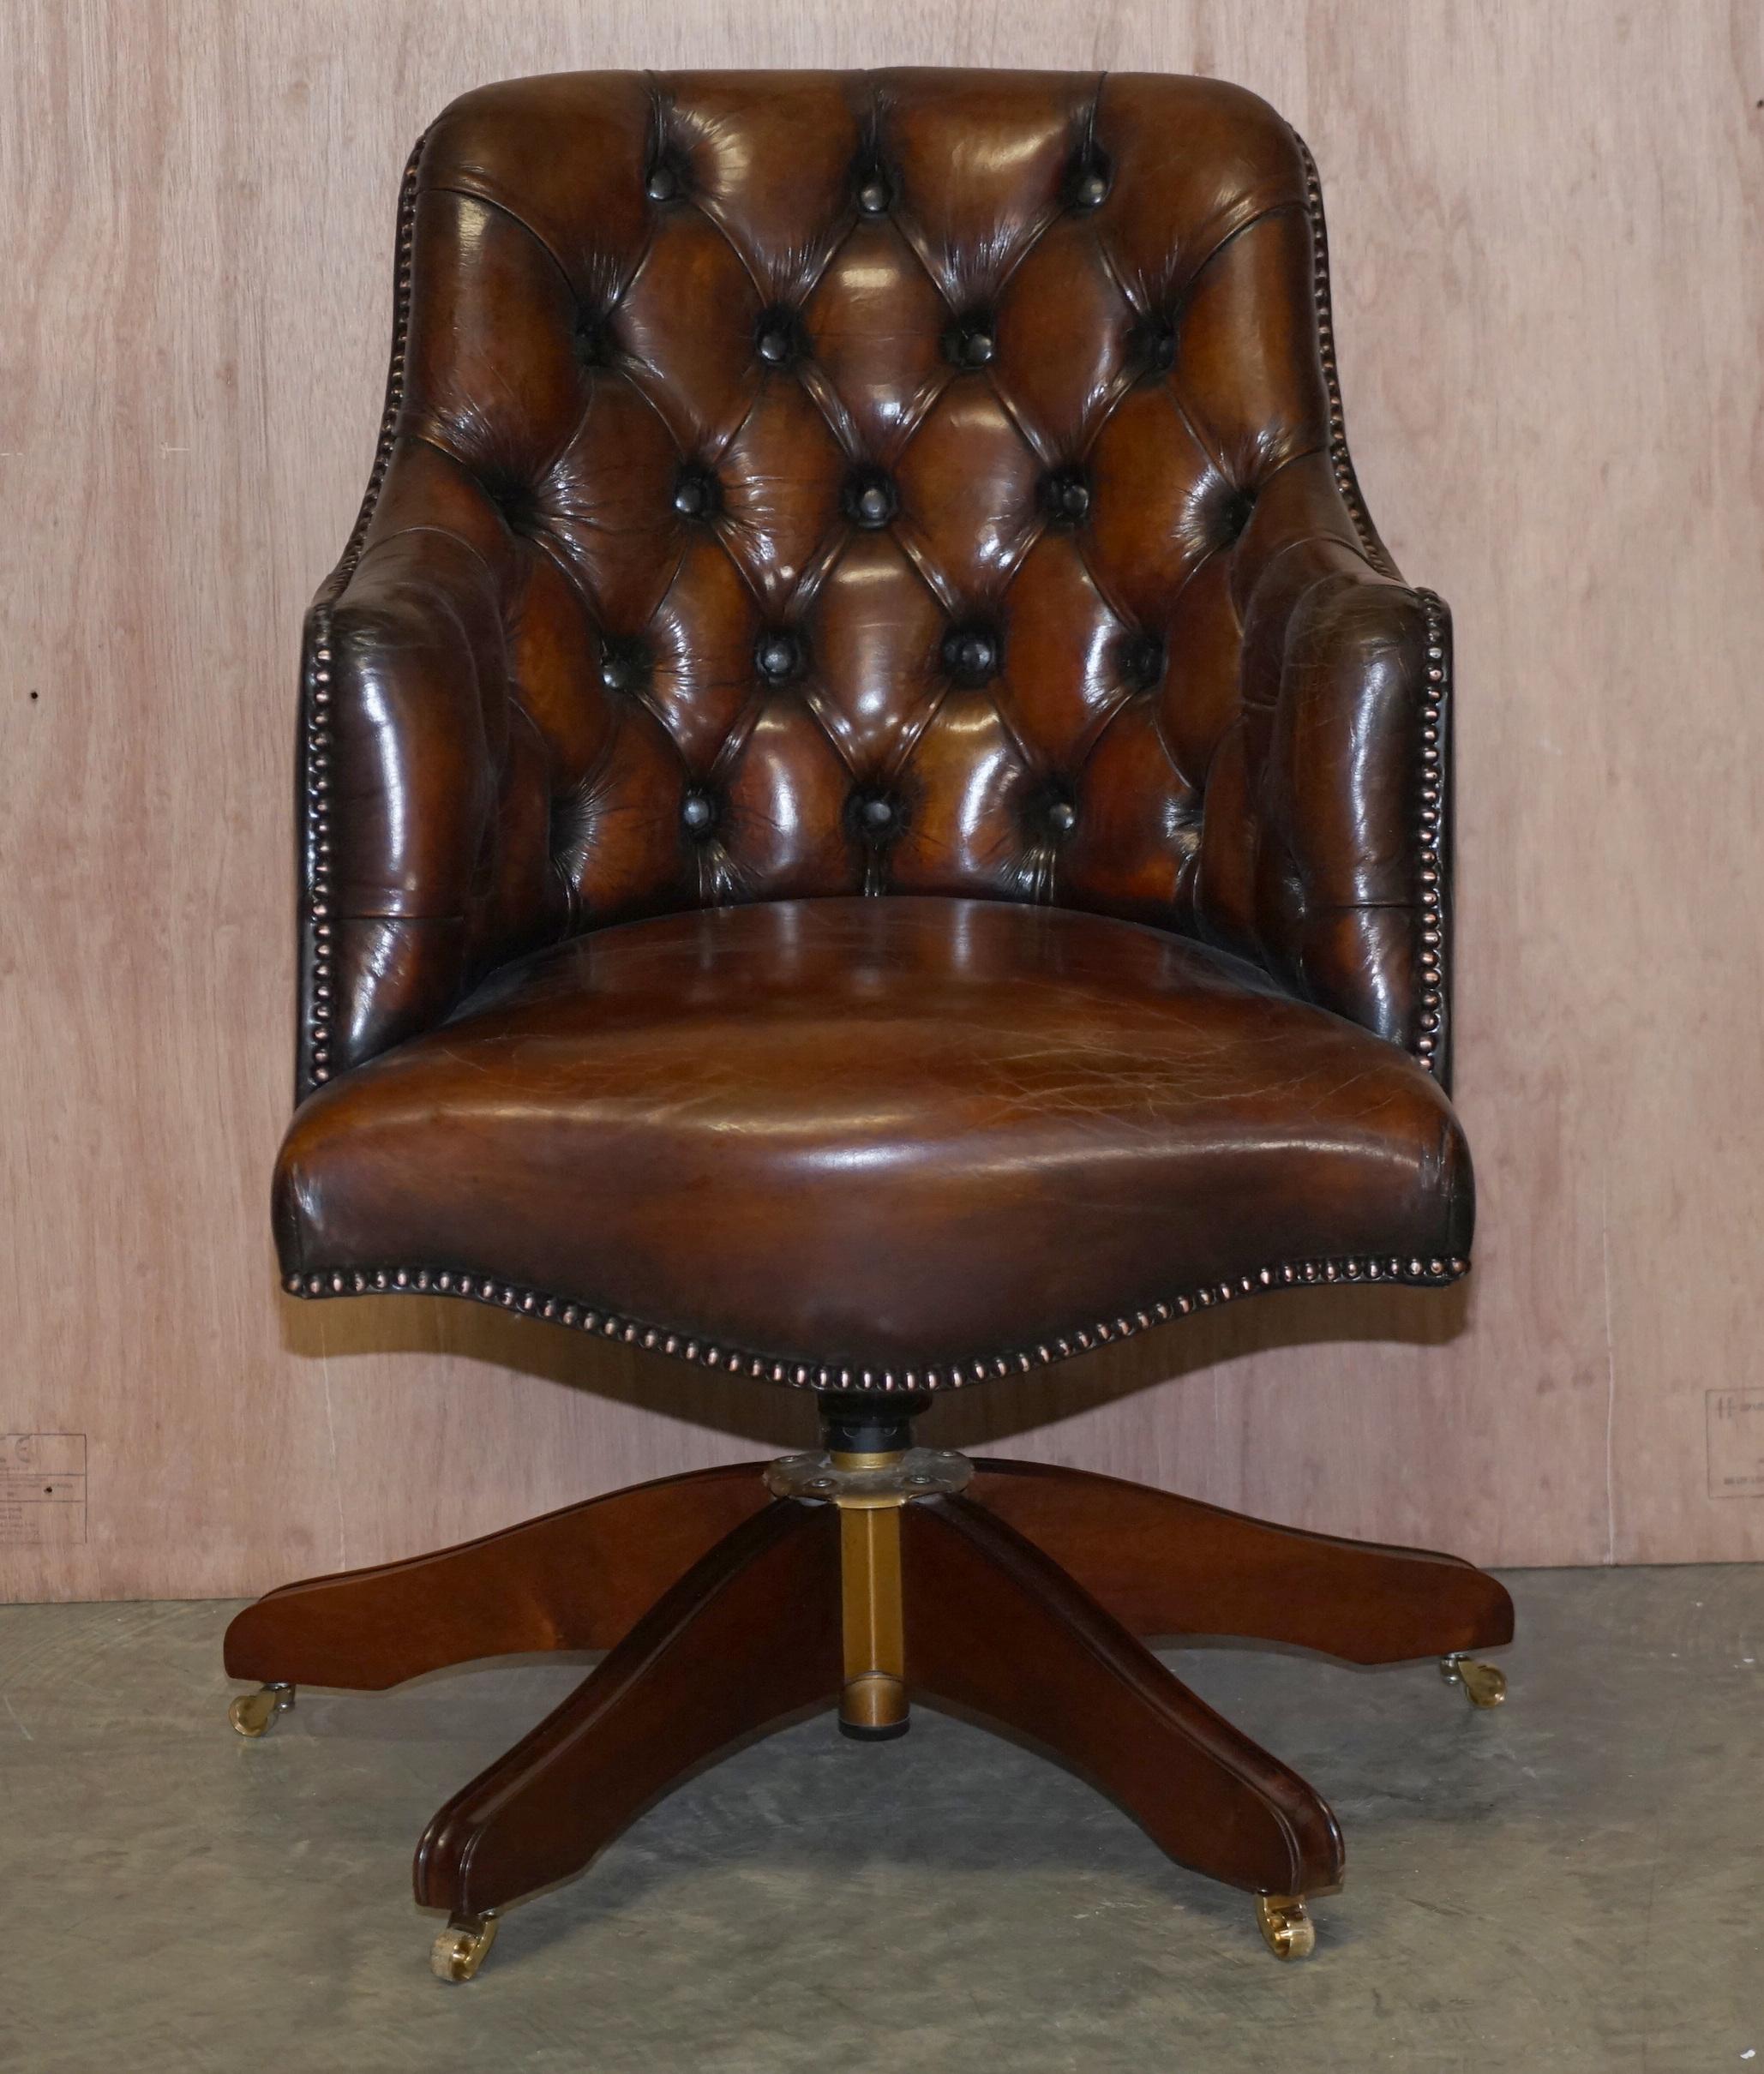 We are delighted to offer this stunning fully restored aged brown leather Chesterfield directors armchair

This is a very fine and well made English Directors chair, it has a sprung base, Chesterfield tufted all over and the frame is mahogany and